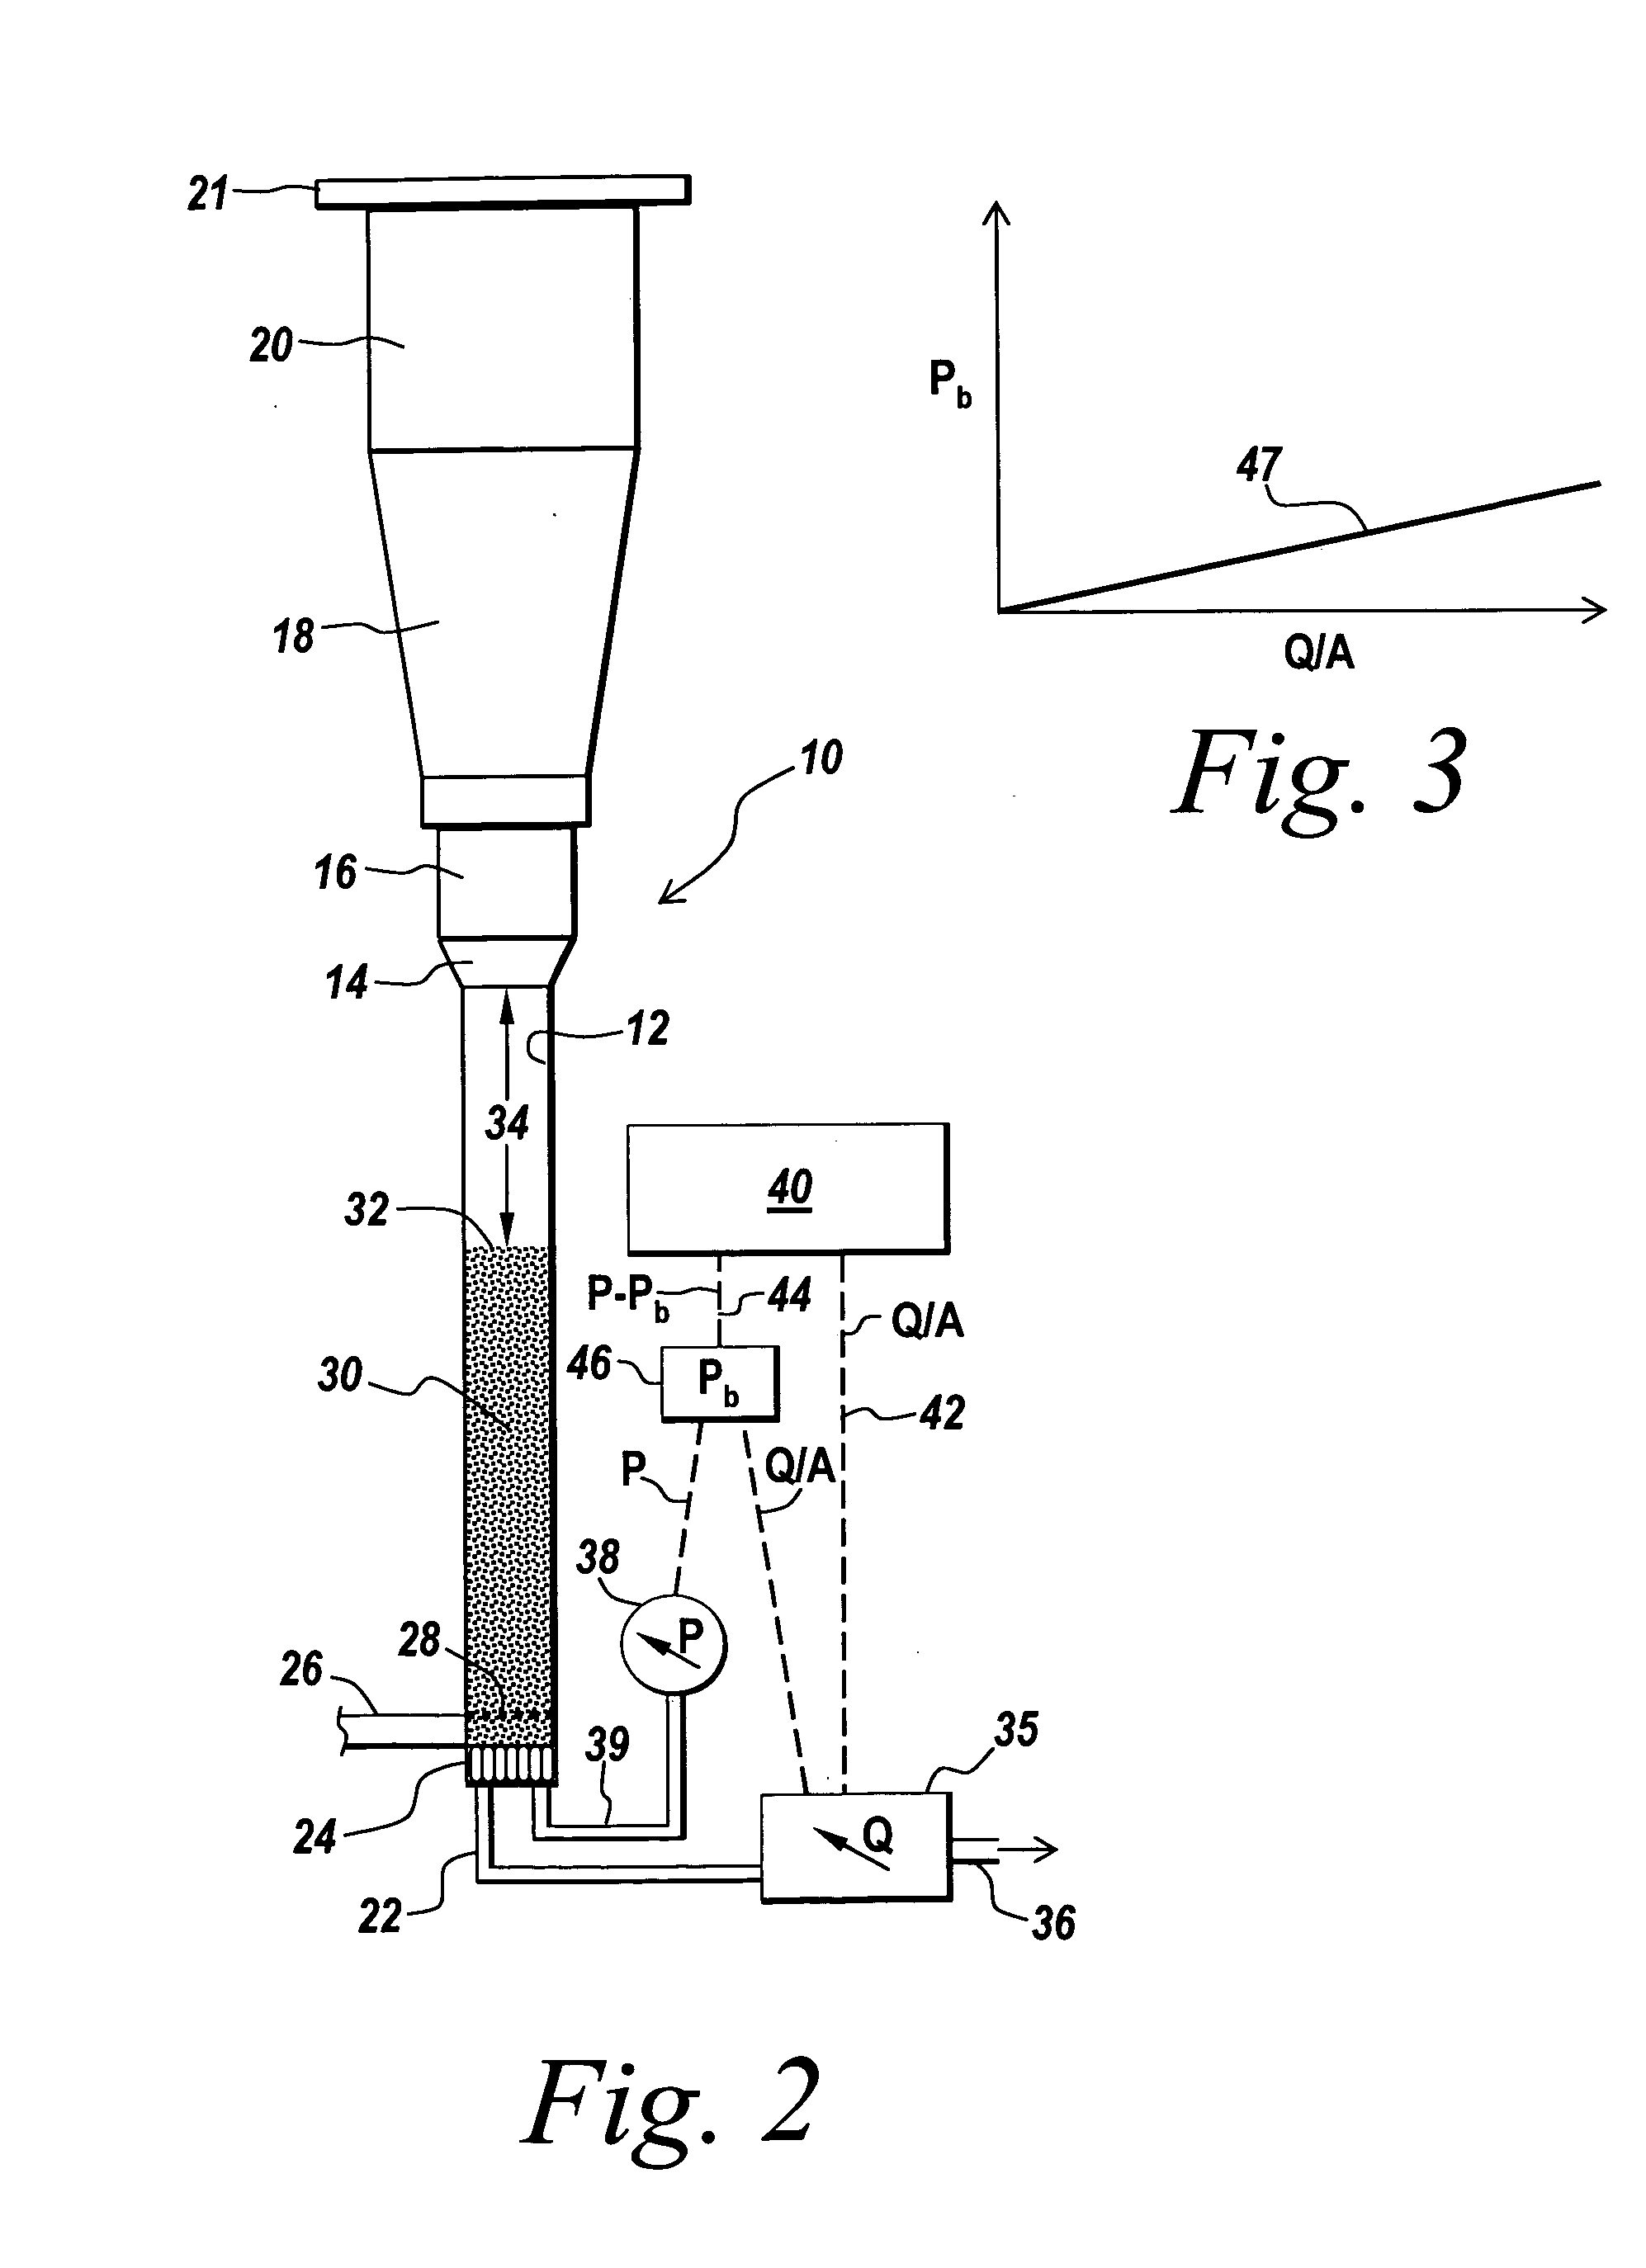 Method and apparatus for segregation testing of particulate solids